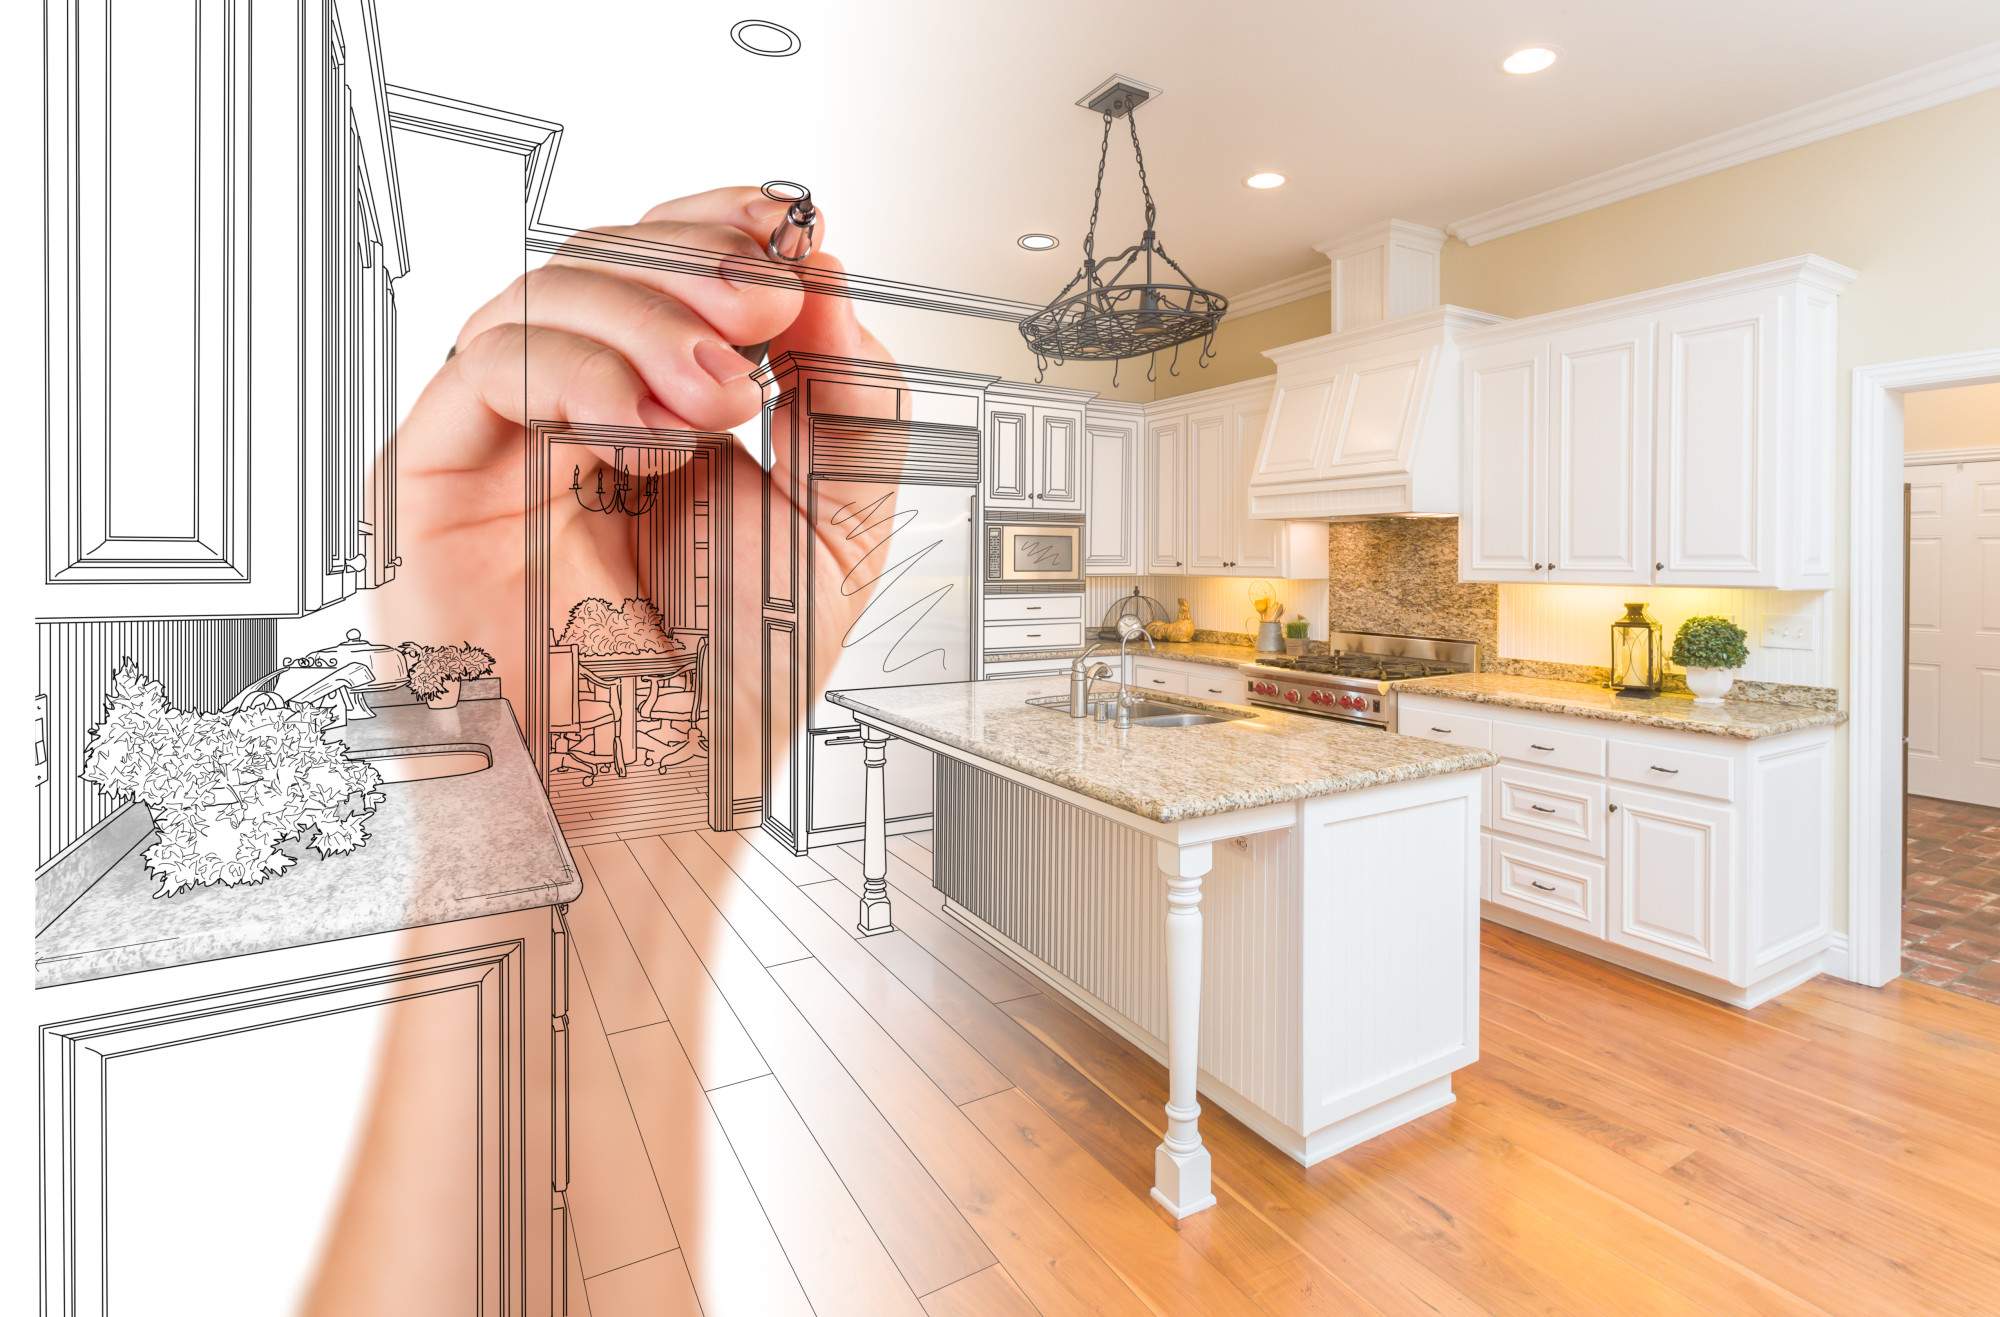 Should I Remodel My Kitchen Before Selling? A Kitchen Remodeling Guide